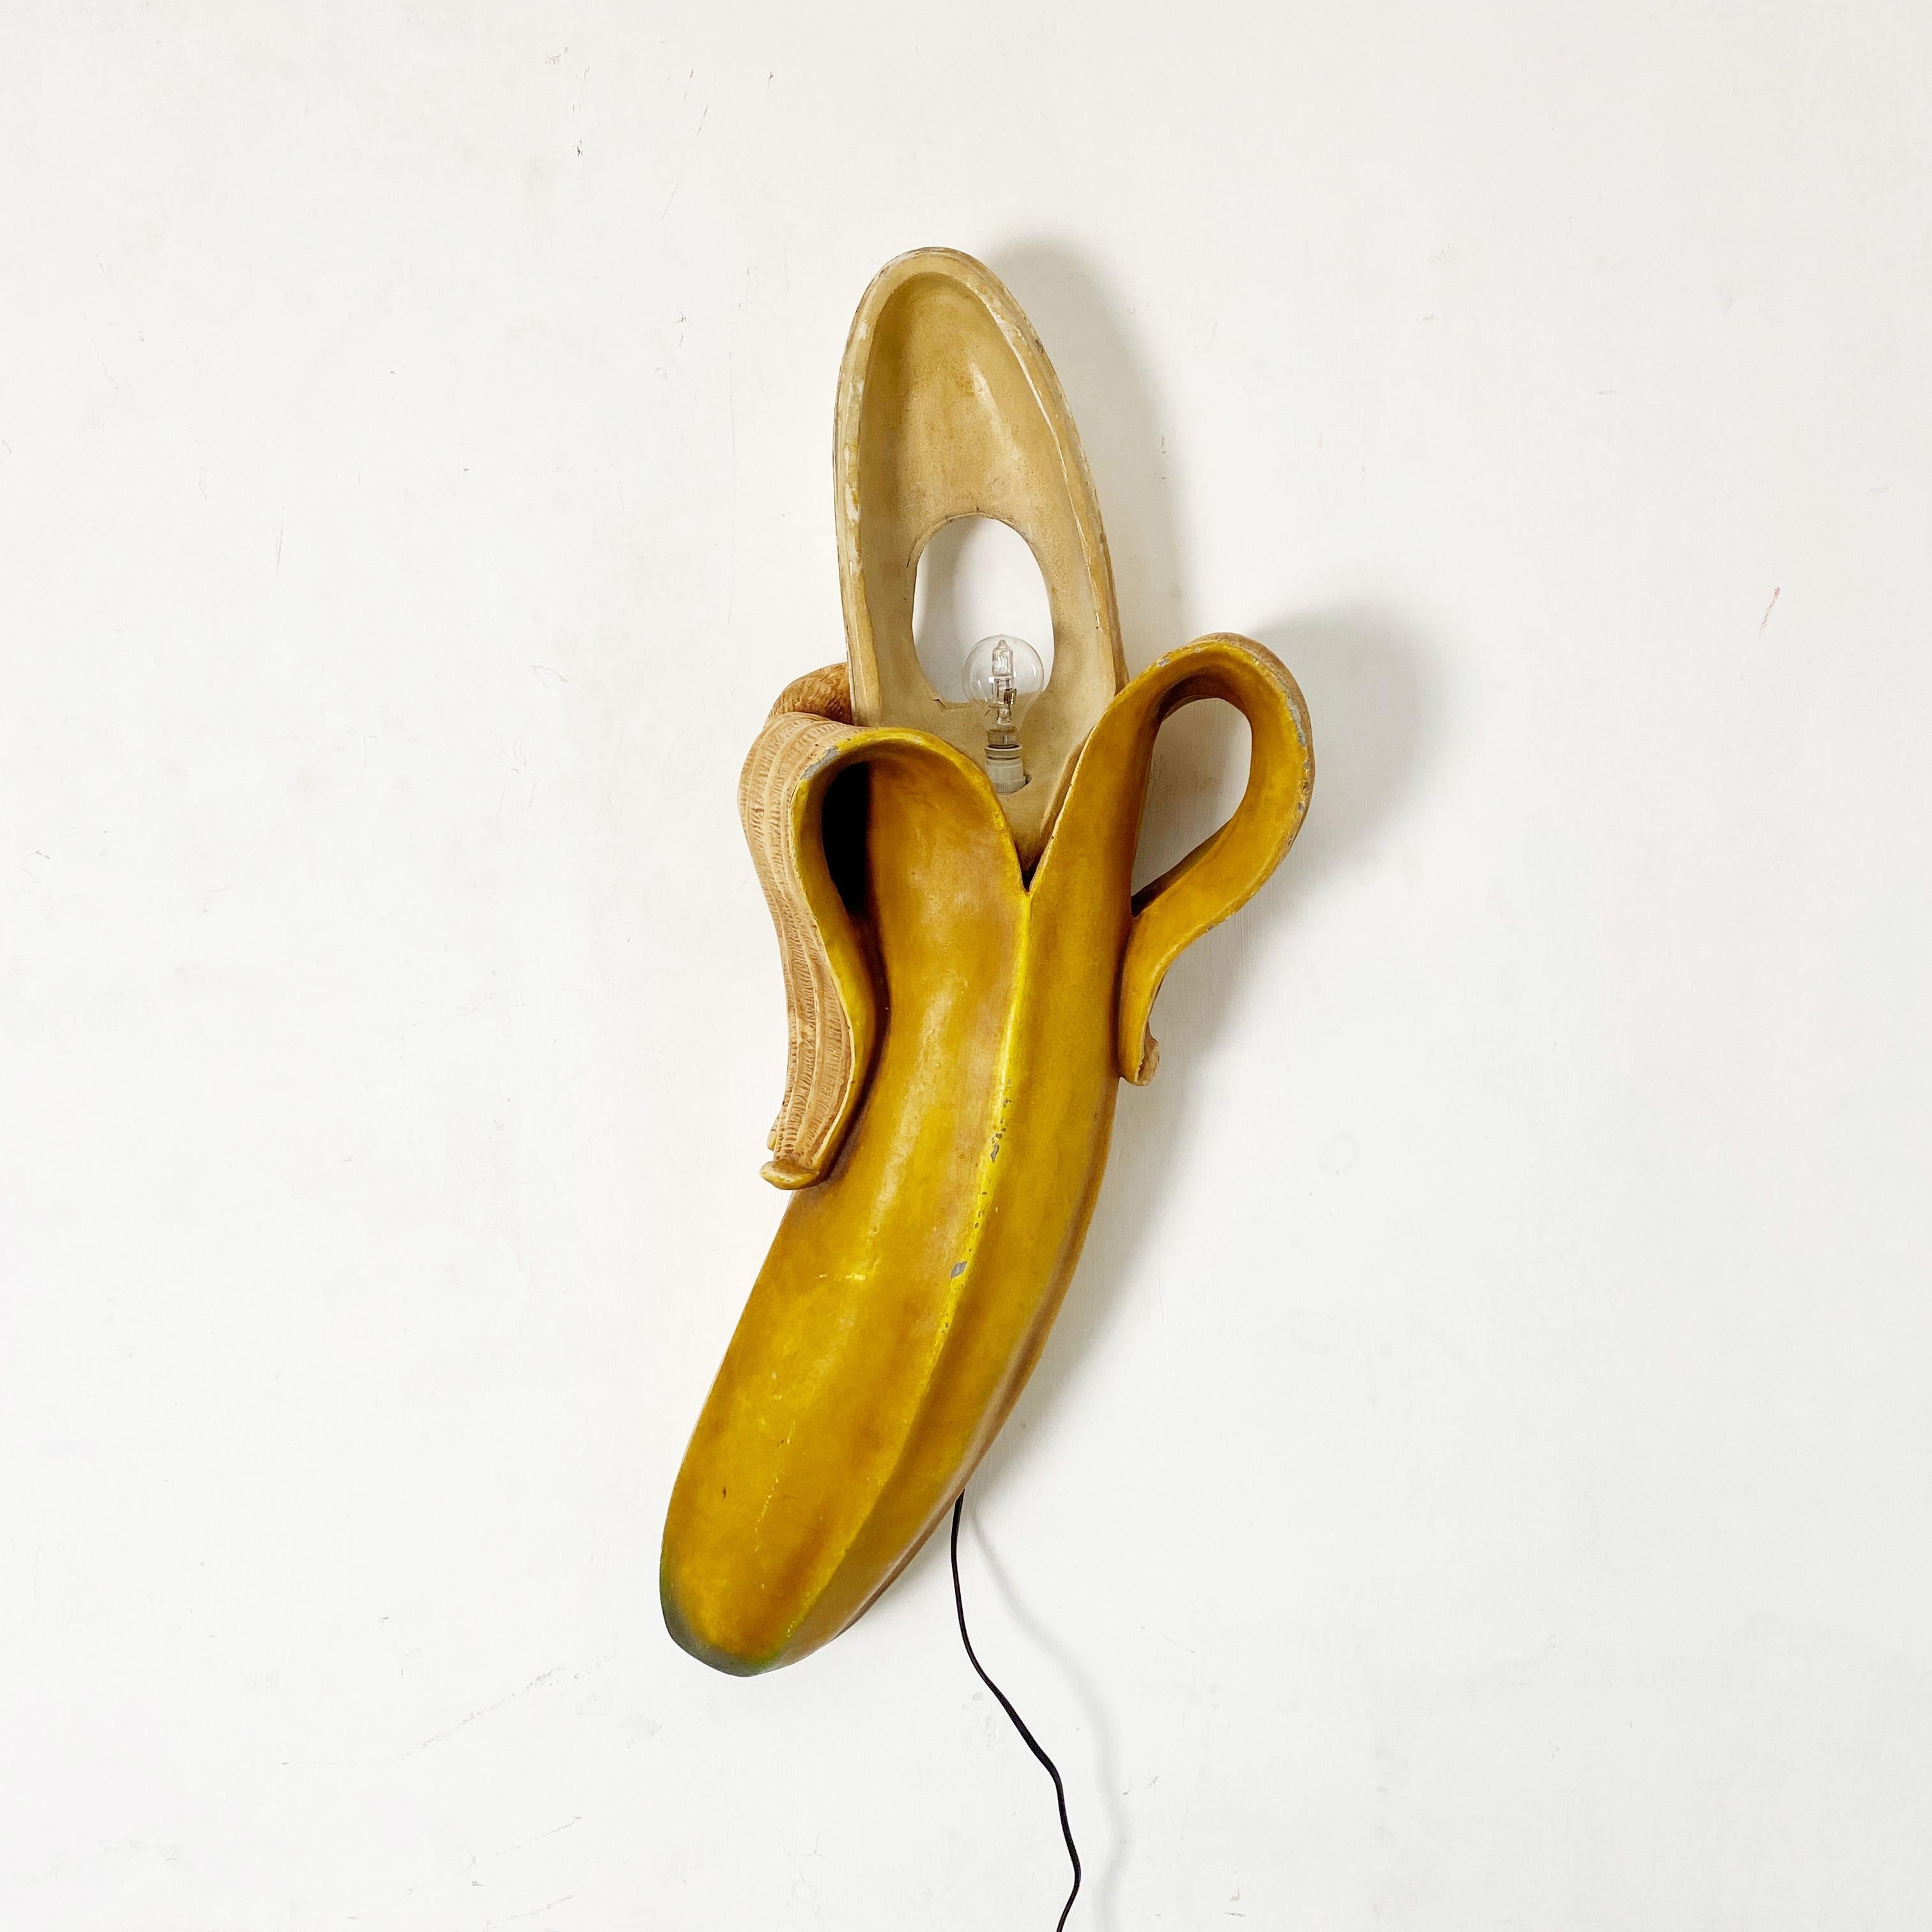 Banana-shaped resin wall lamp, 1990s
We love it, it is a beautiful decorative Banana-shaped wall lamp, it is in resin and probably hand painted in some part.
It can be use with 120v or 220v with E14 bulb Led or not
It create a big light, it dipend